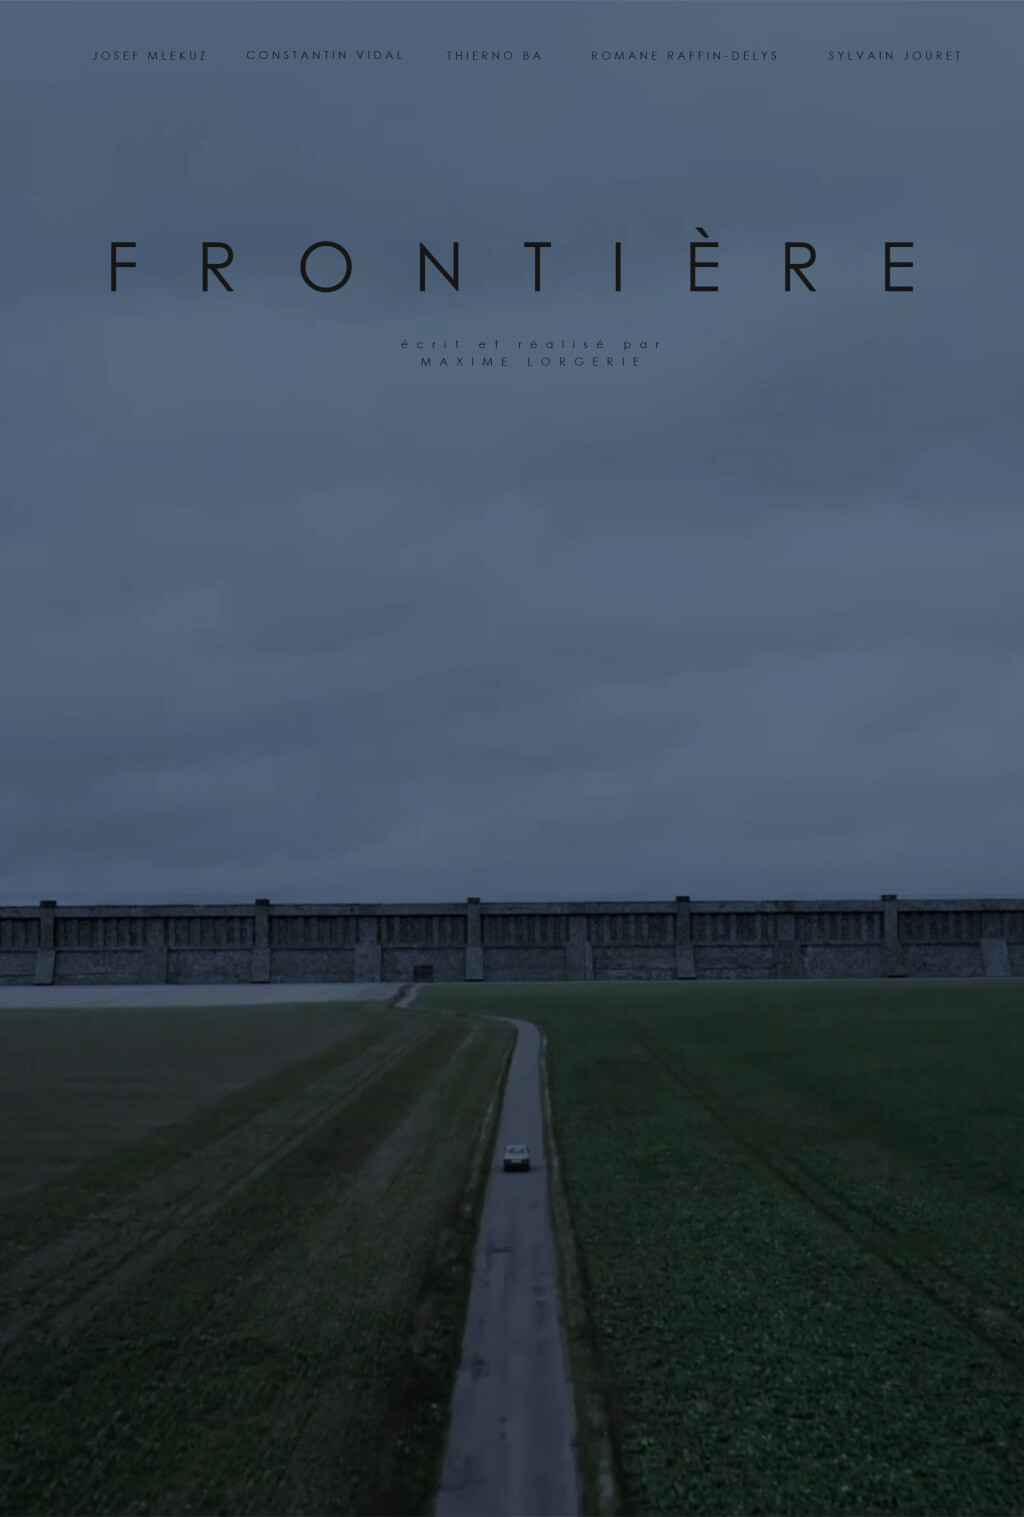 Filmposter for Frontière